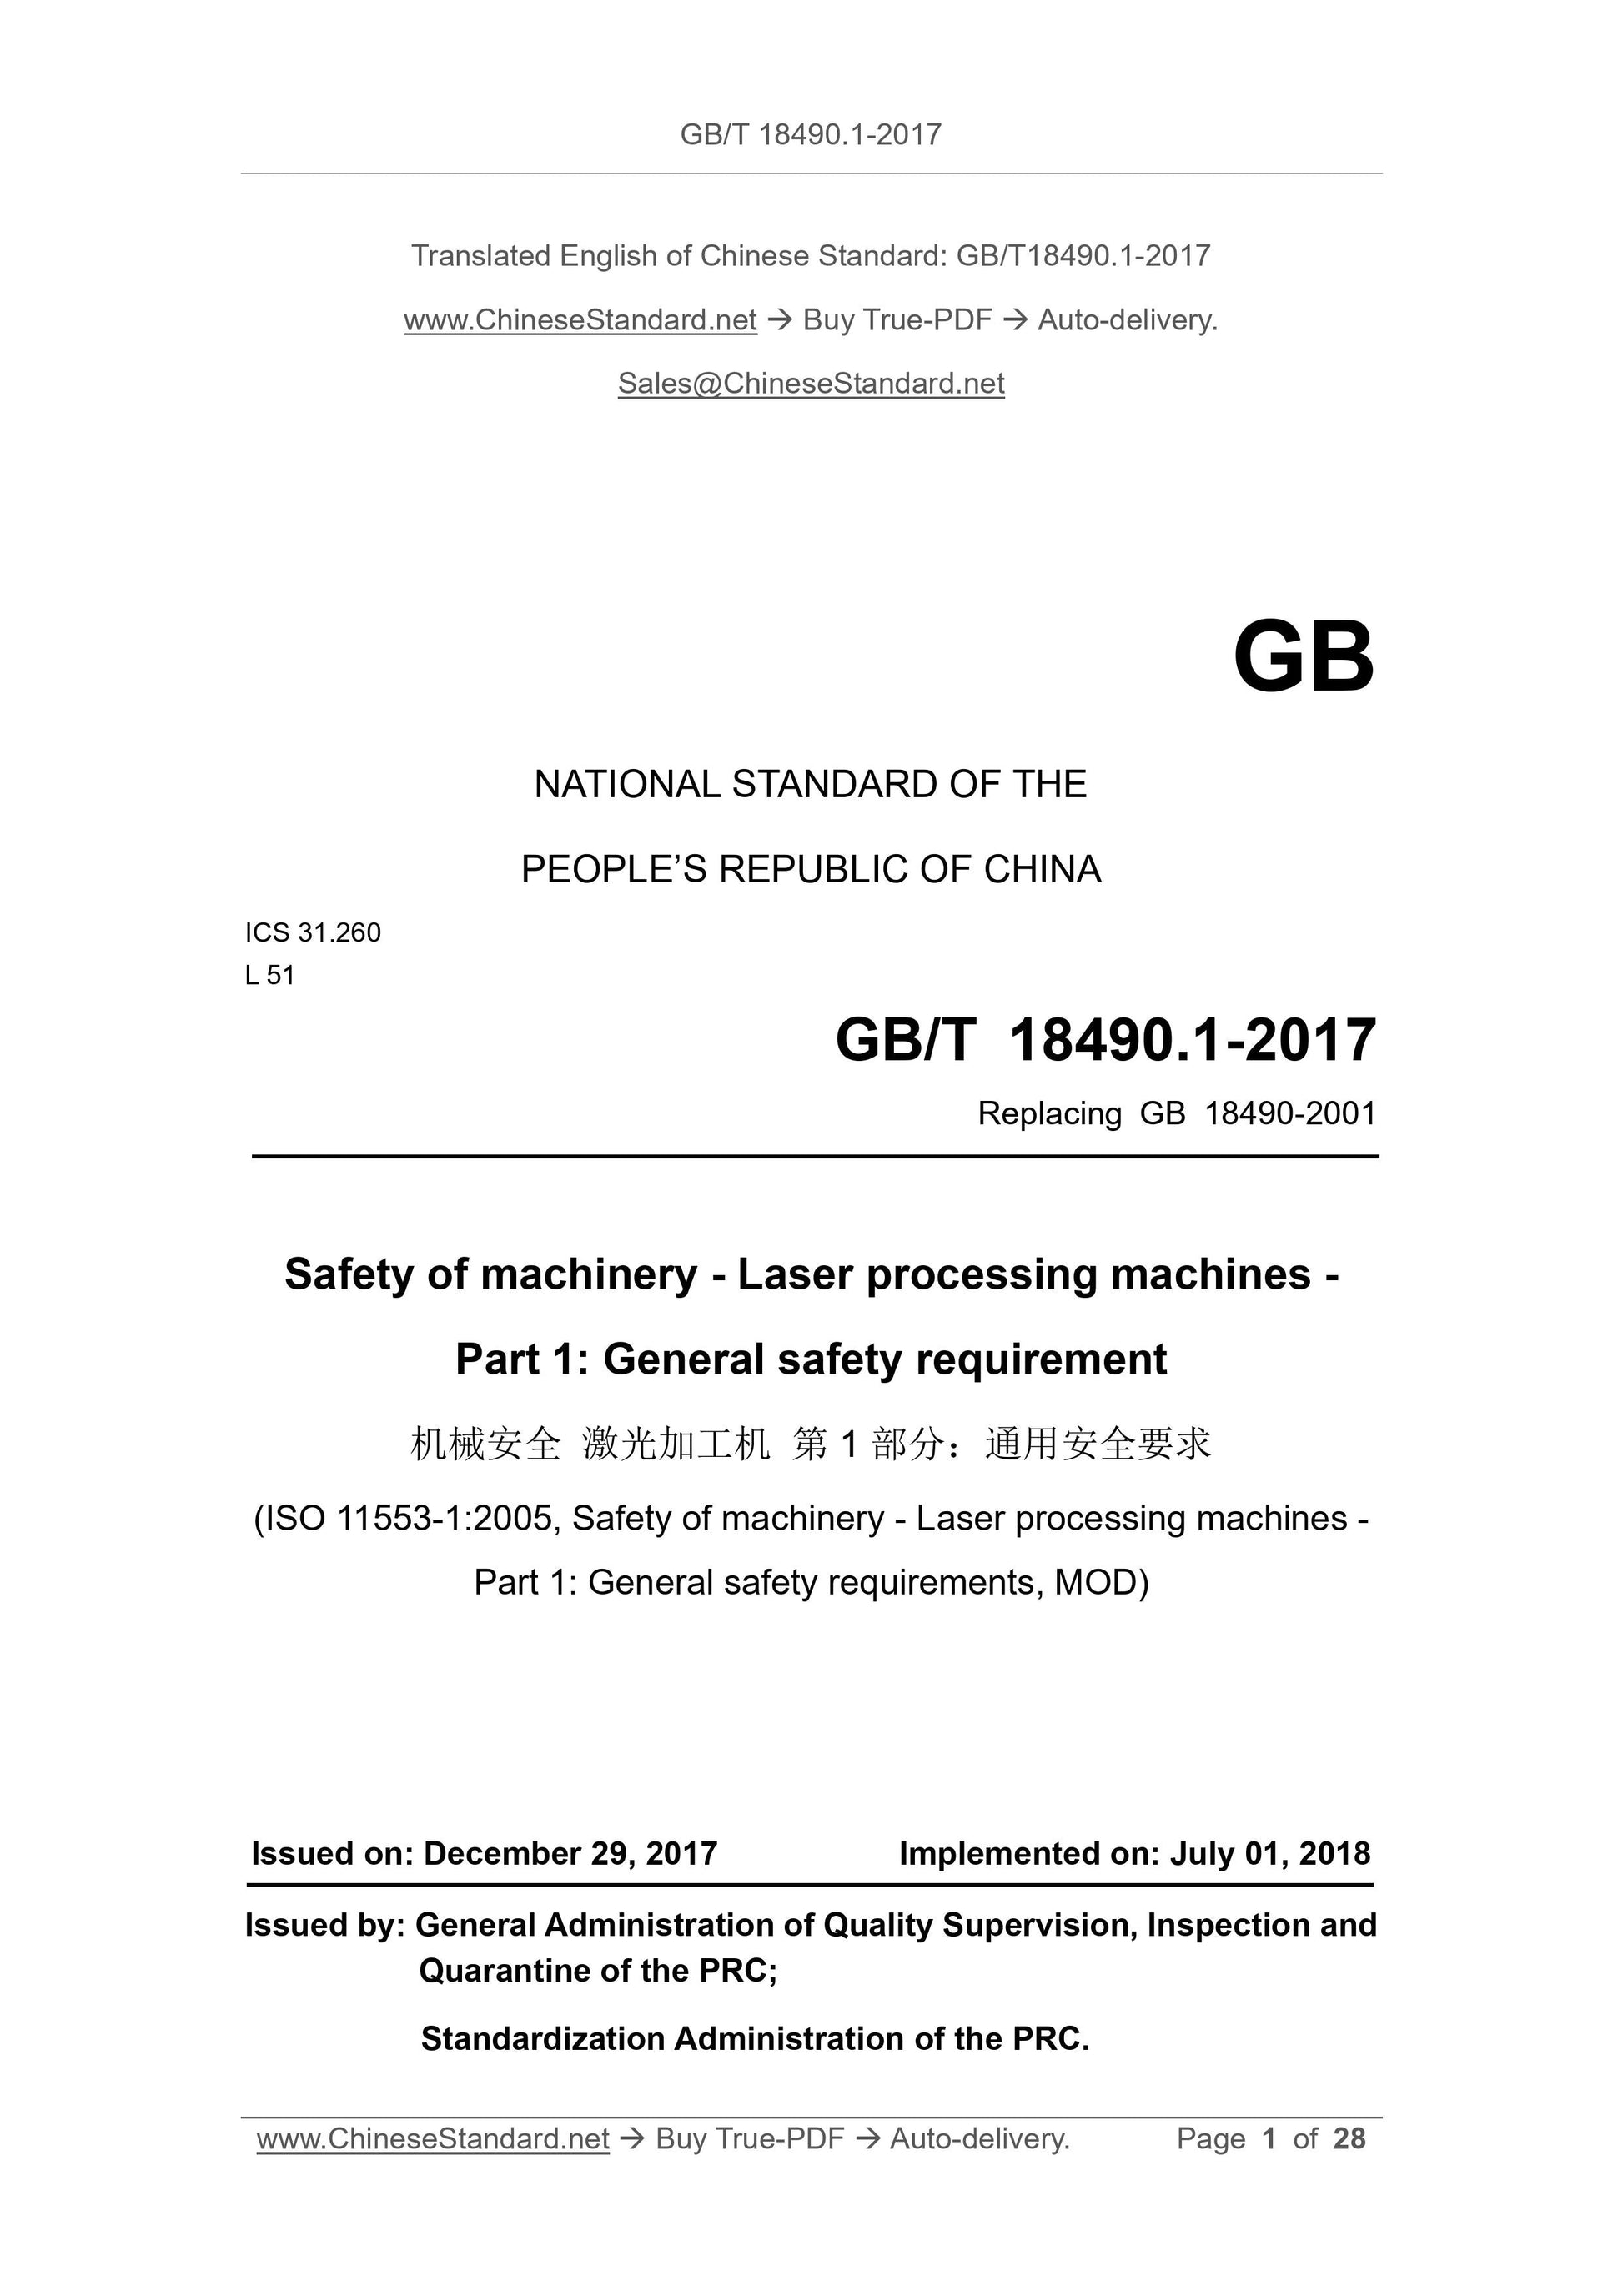 GB/T 18490.1-2017 Page 1